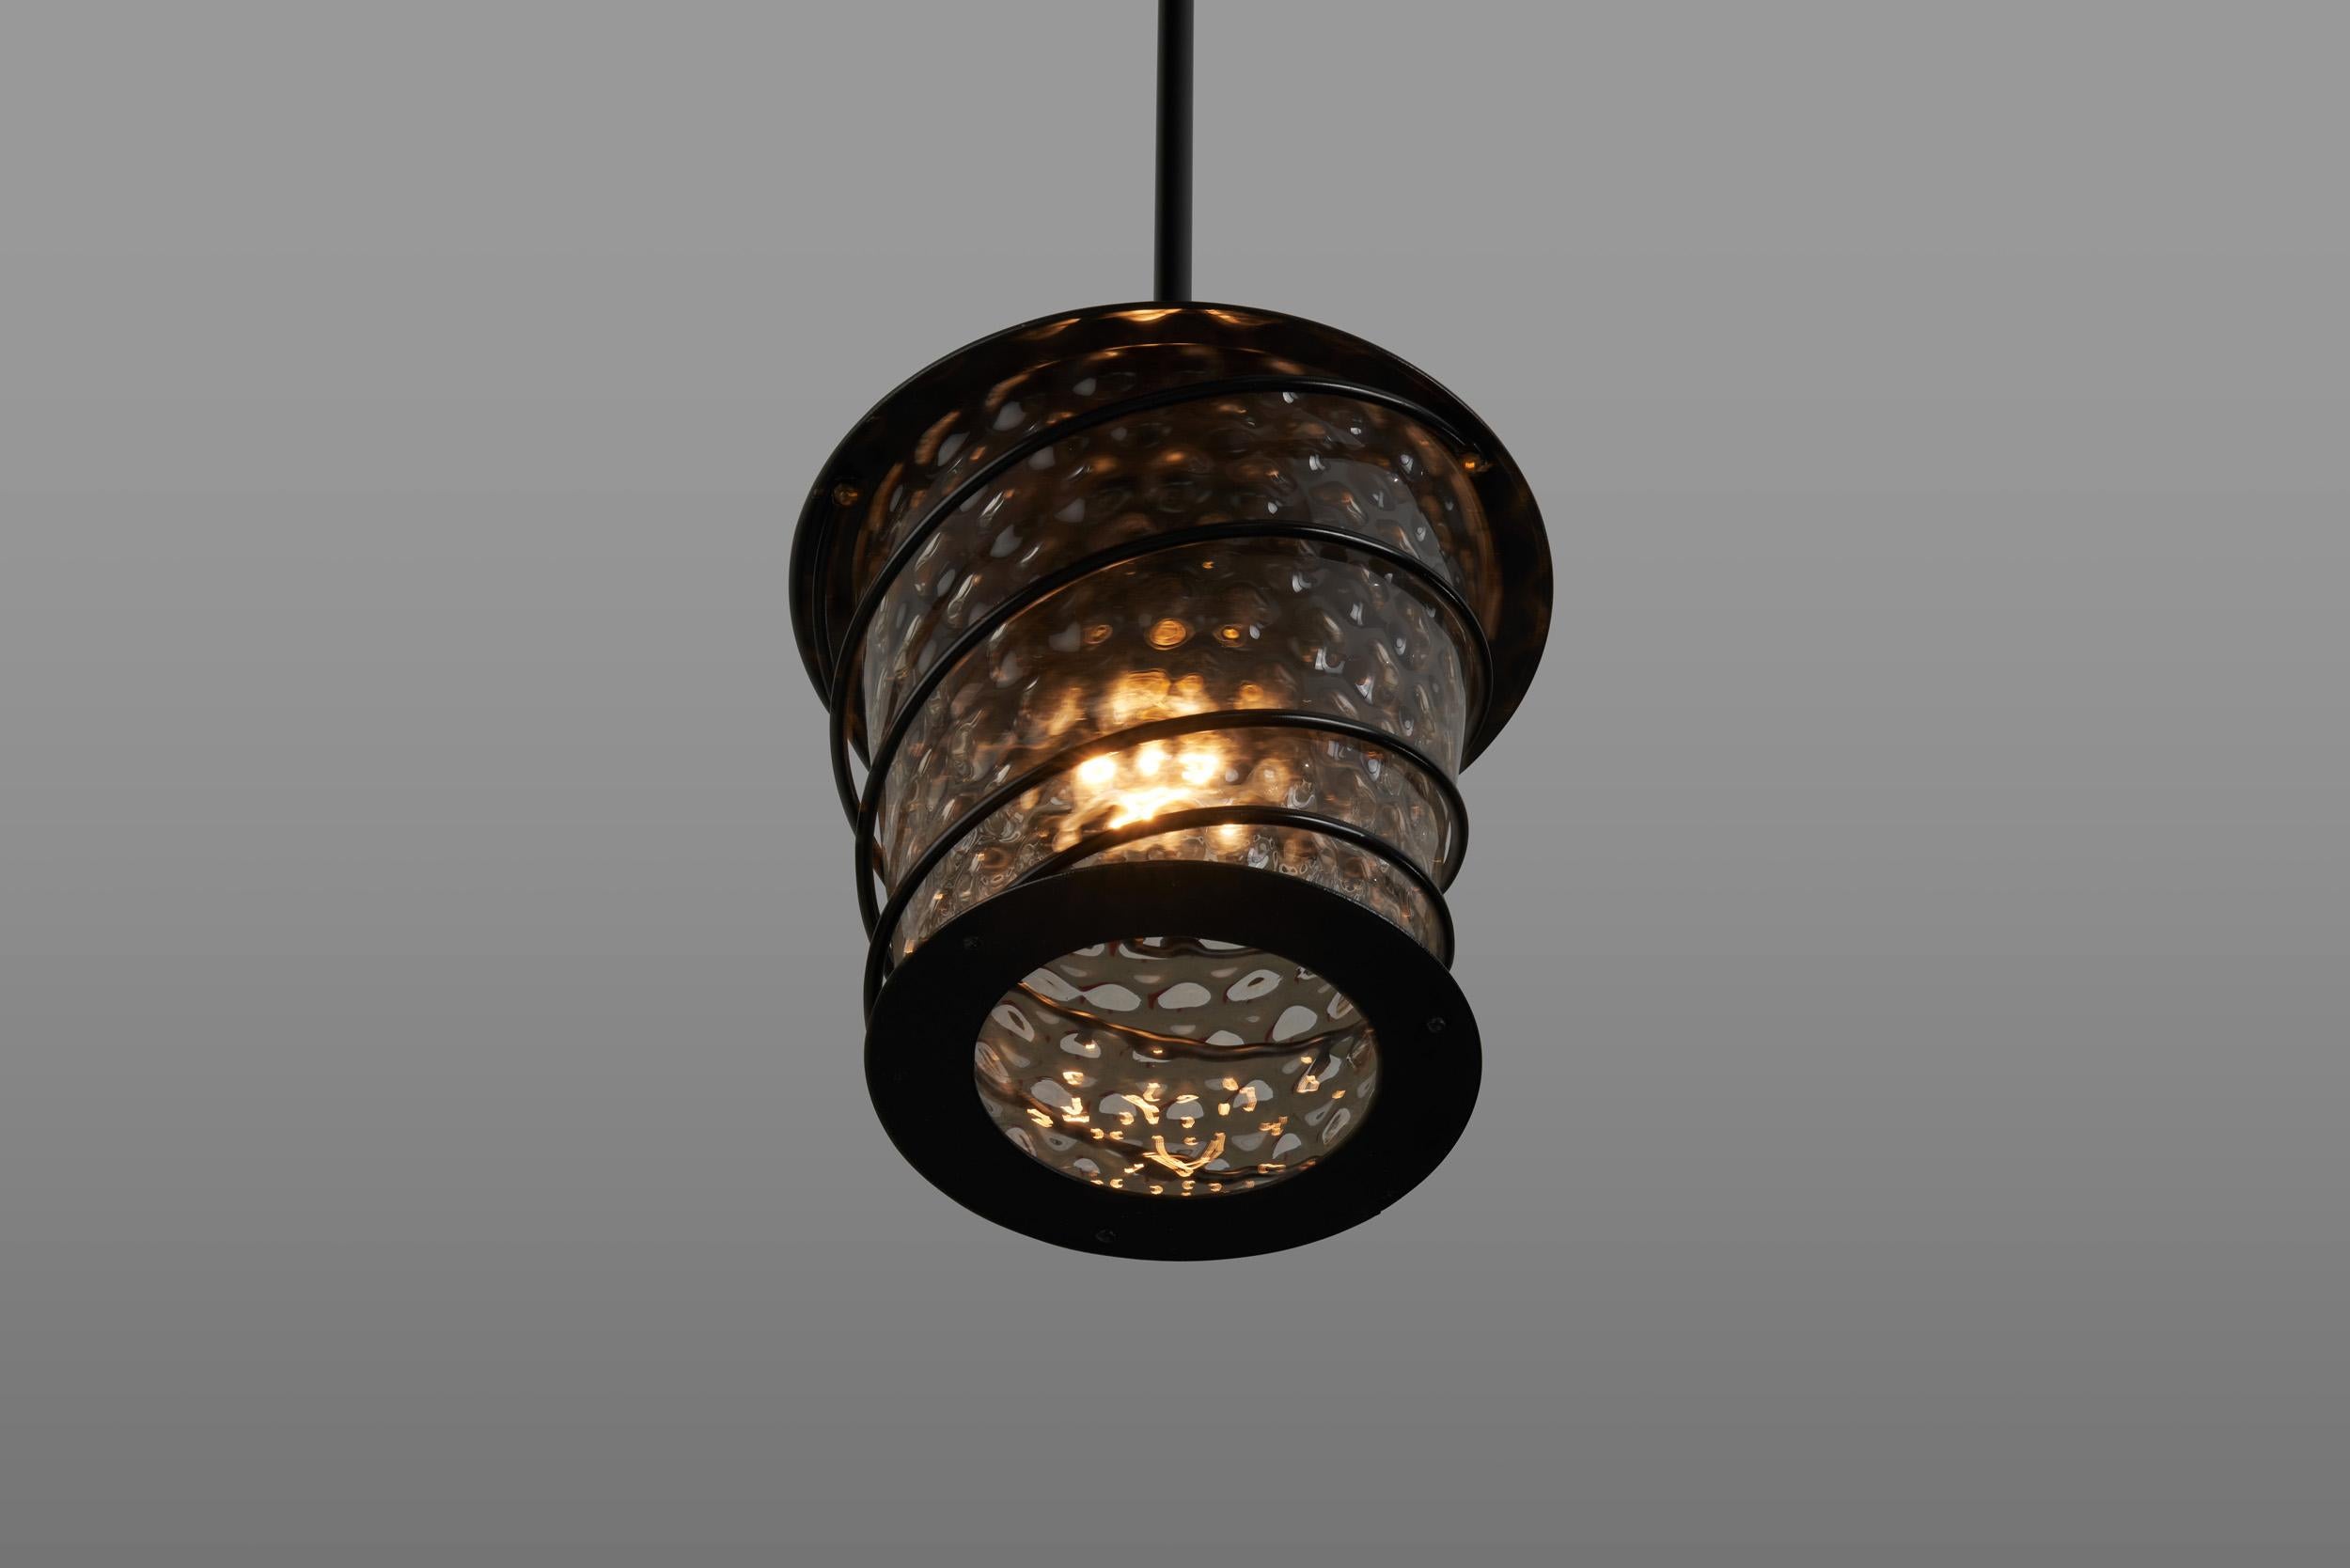 Scandinavian Tin and Glass Accent Ceiling Lamp, Scandinavia, 1920s For Sale 4